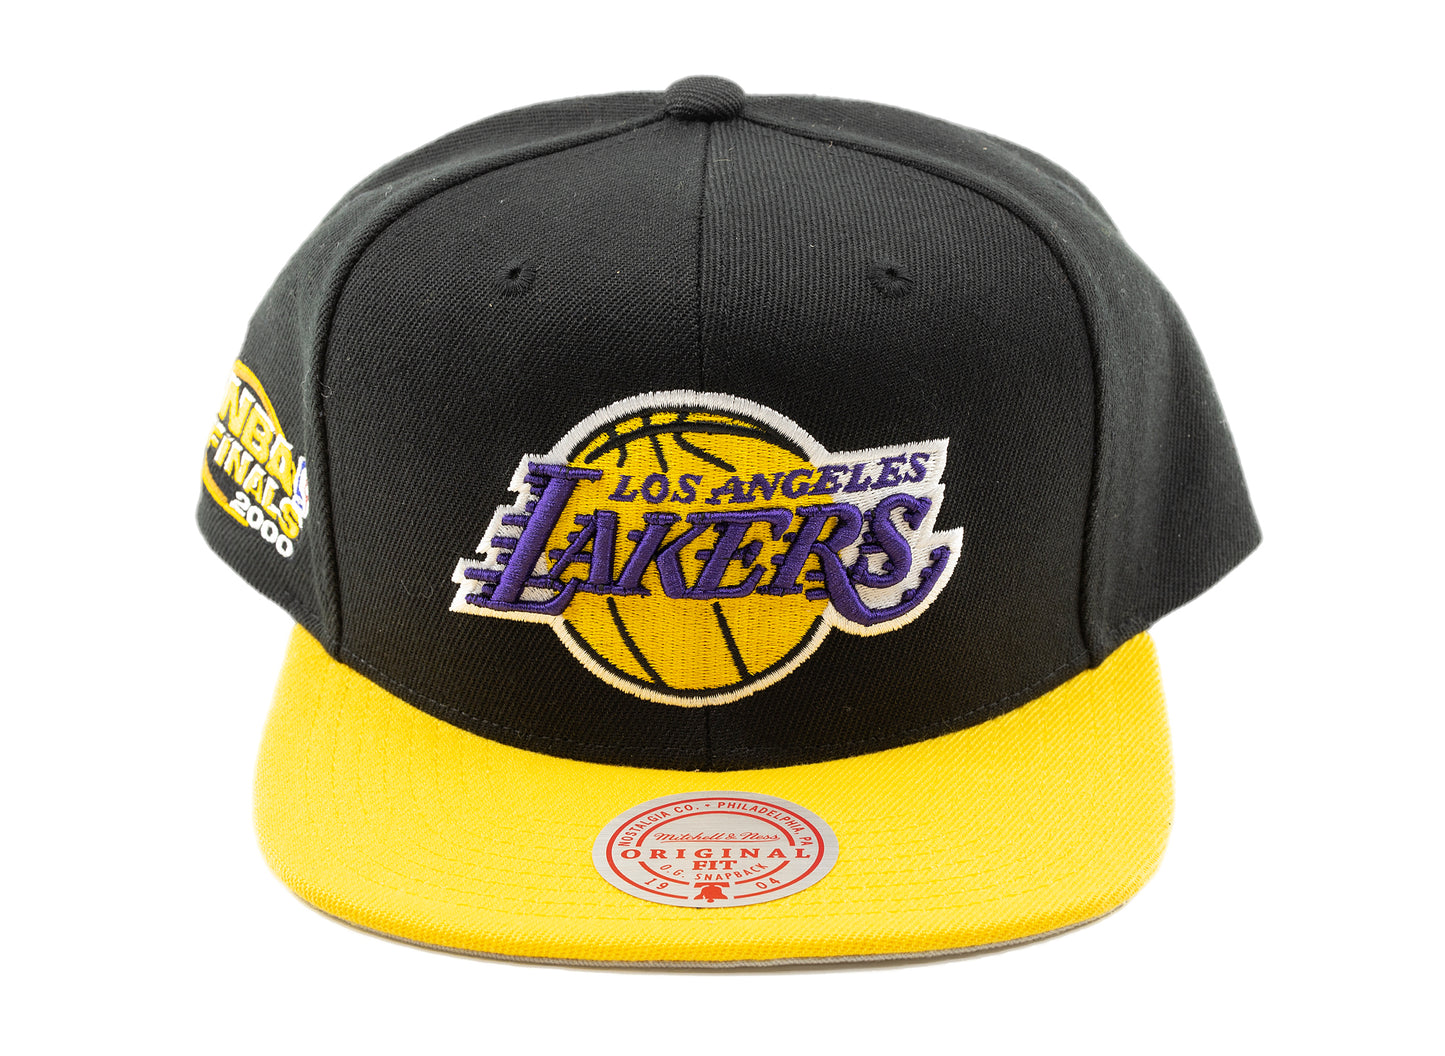 Mitchell & Ness NBA Finals Patch HWC Los Angeles Lakers Snapback